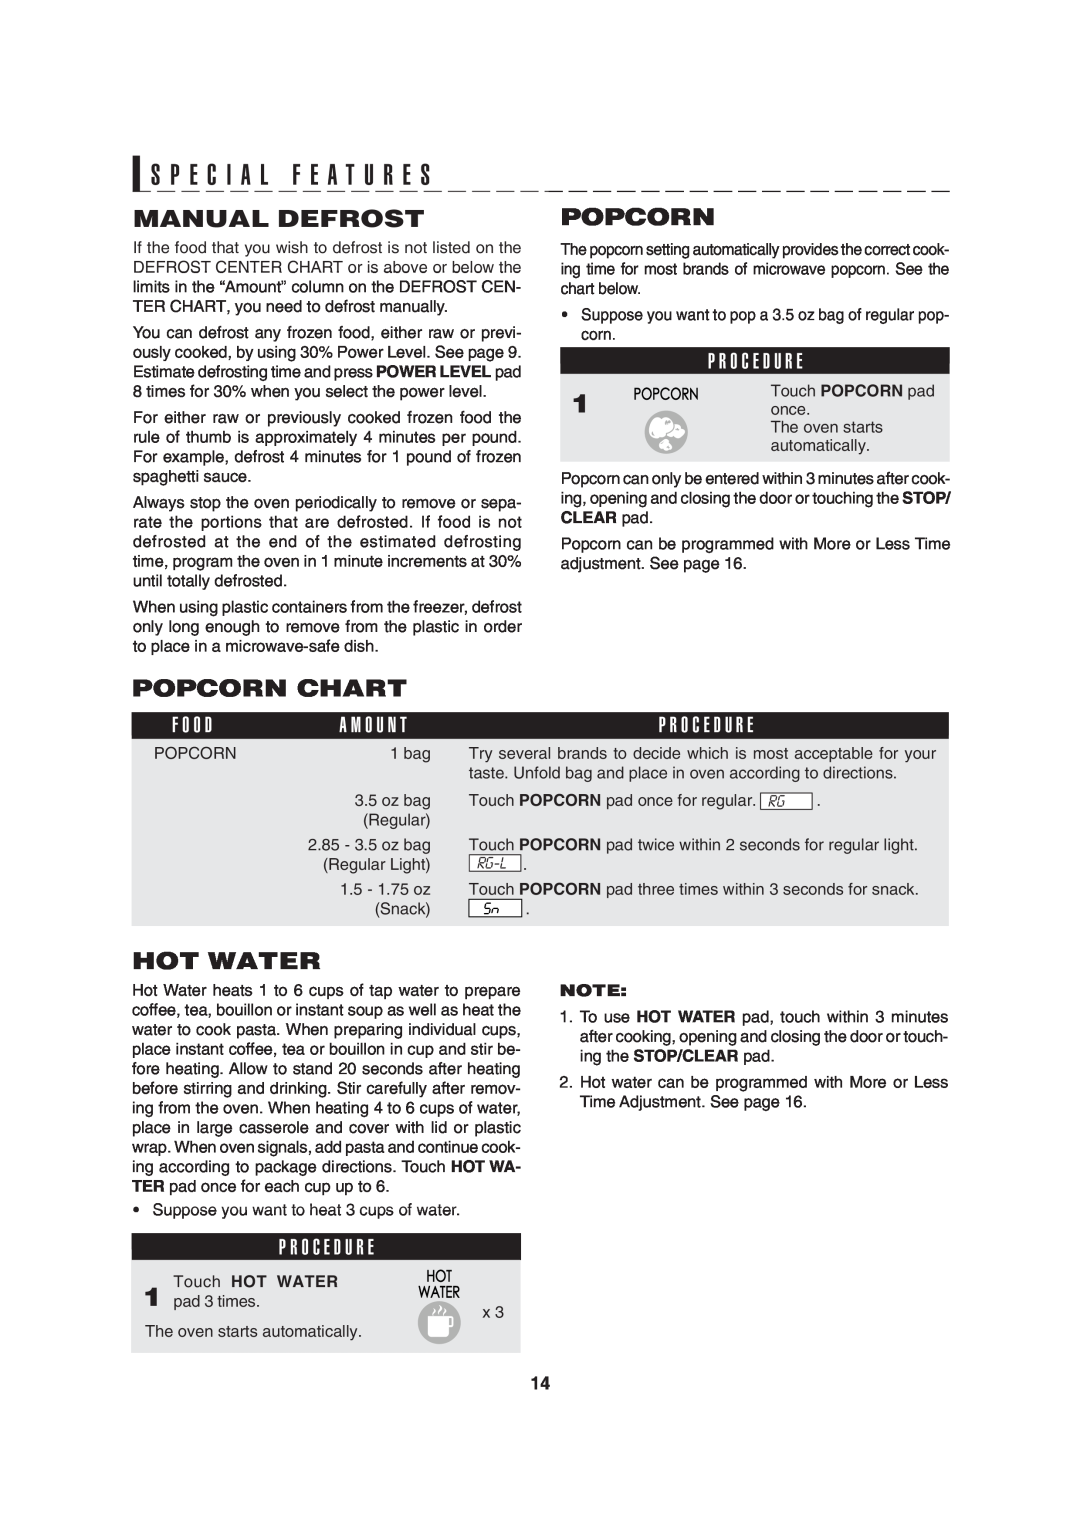 Sharp R-310H operation manual Manual Defrost, Popcorn Chart, Hot Water, S P E C I A L F E A T U R E S, Touch HOT WATER 